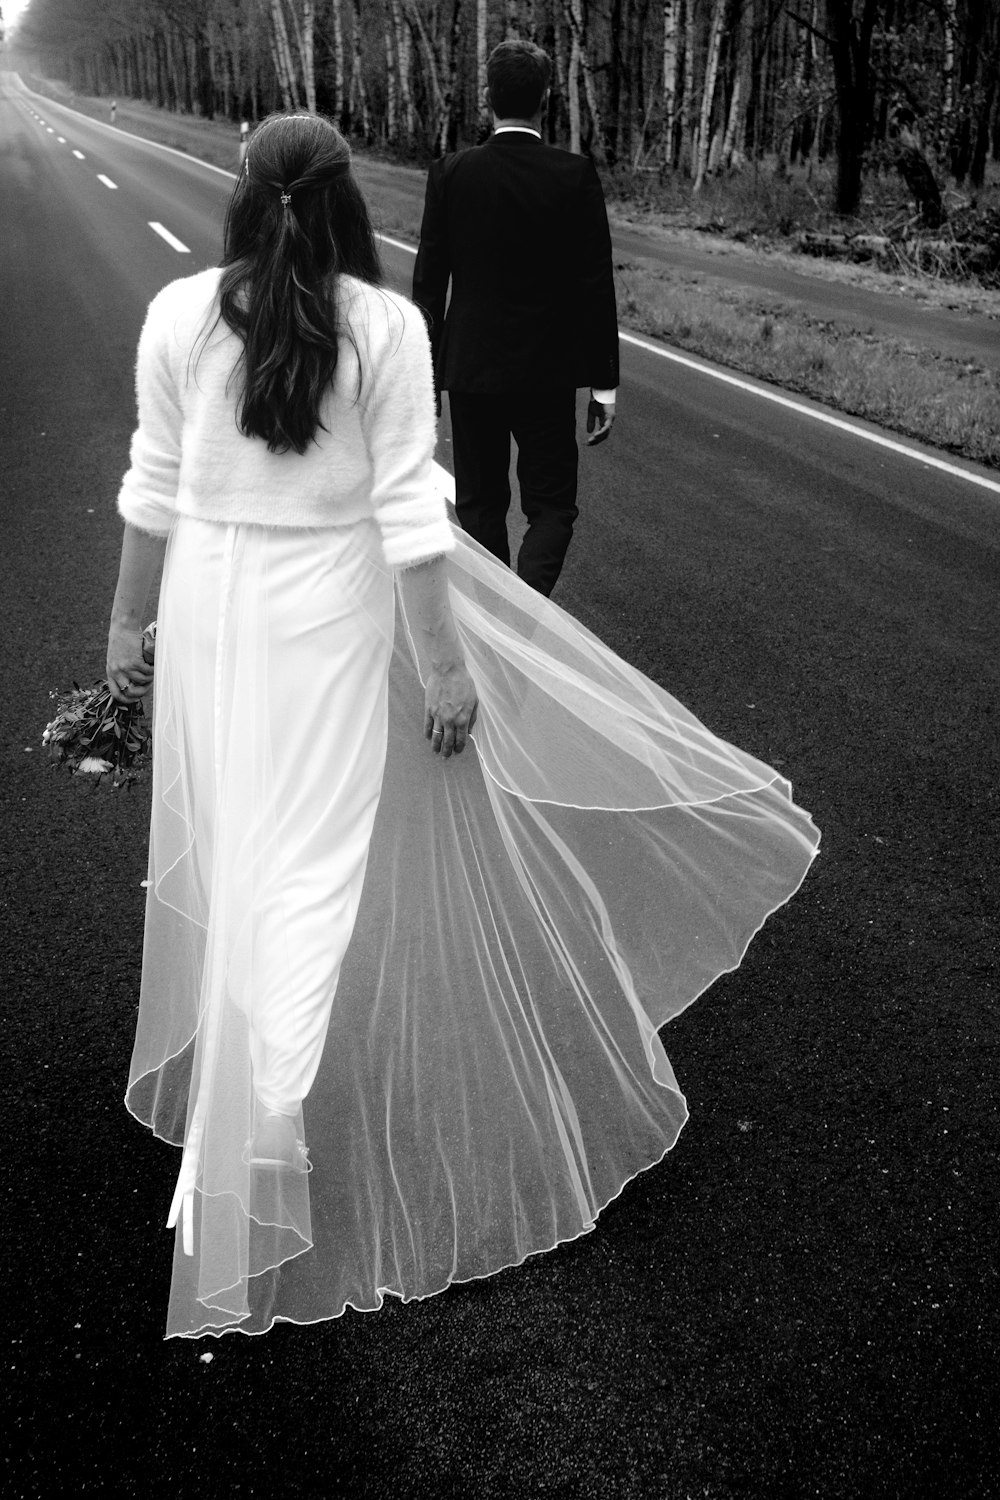 a man and woman walking down a road holding hands